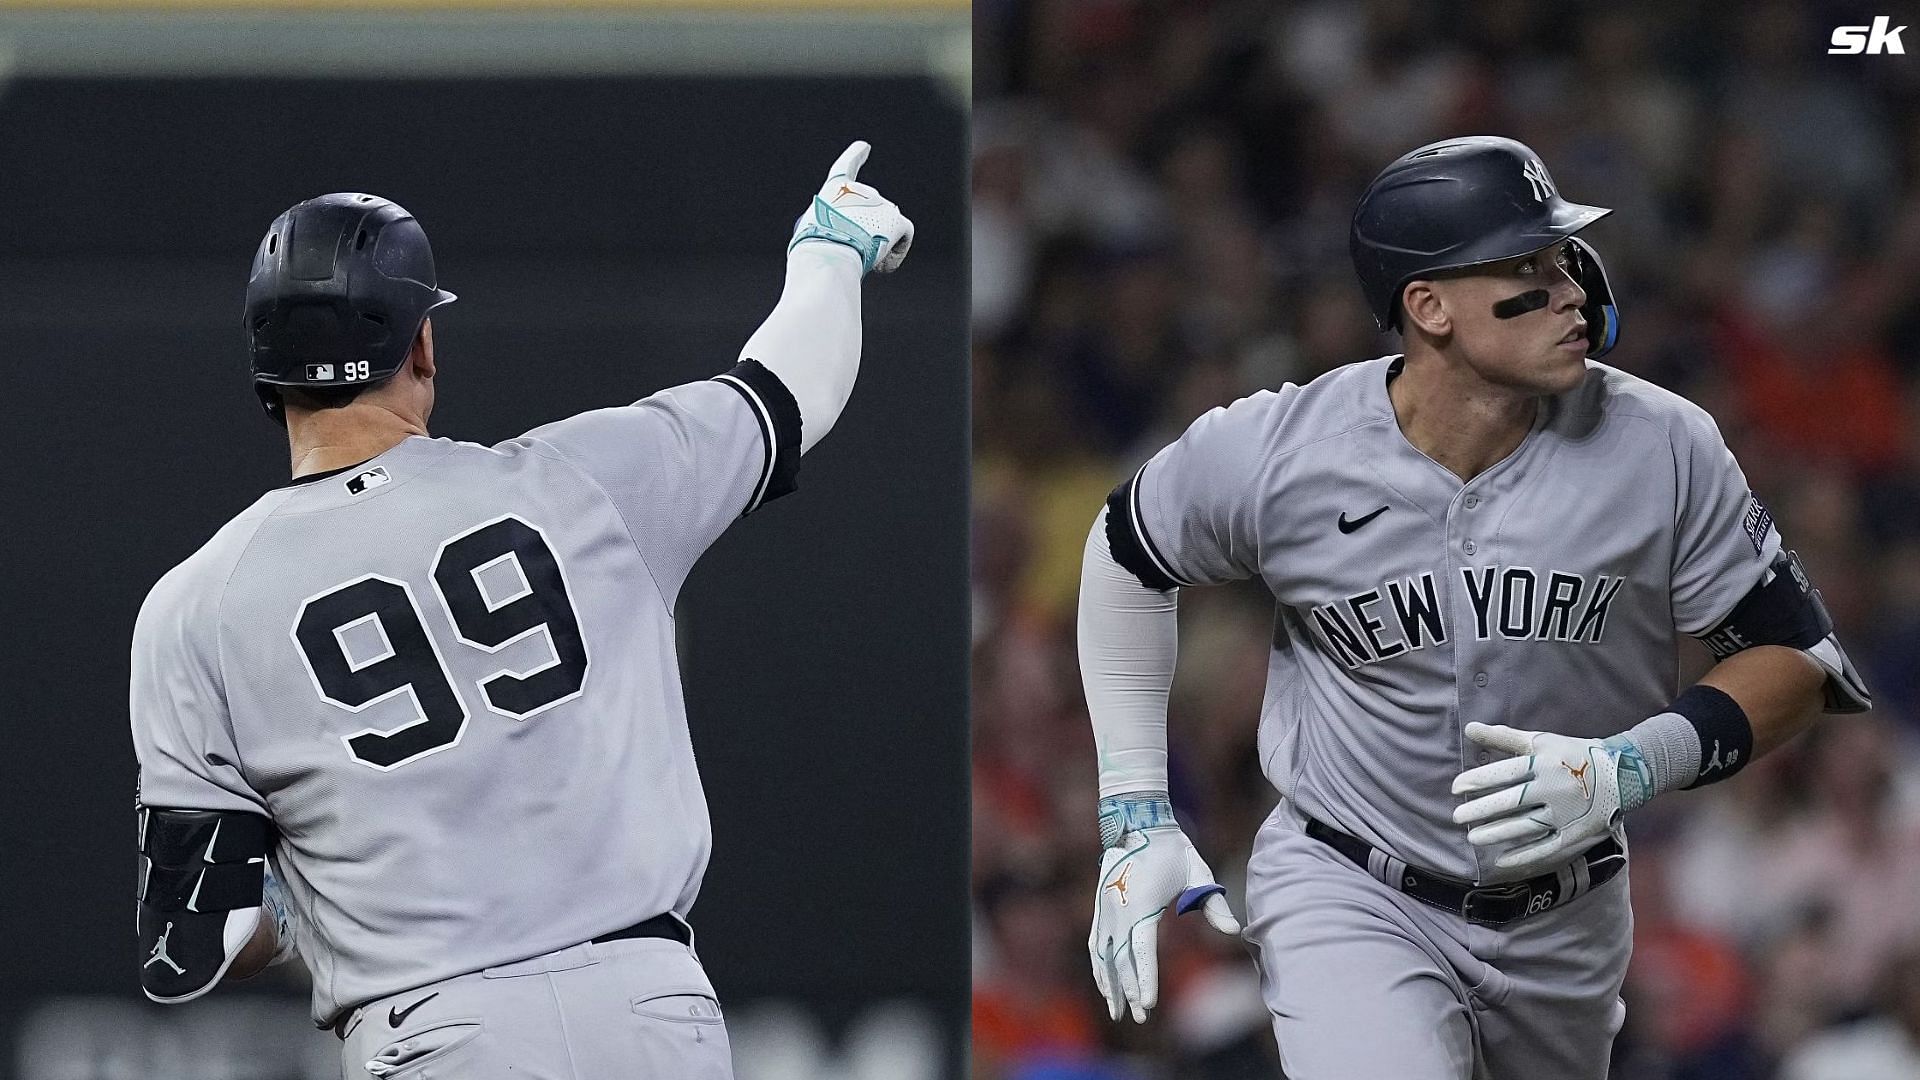 Yankees superstar Aaron Judge fastest to 250 home runs to leave fans ecstatic "Best